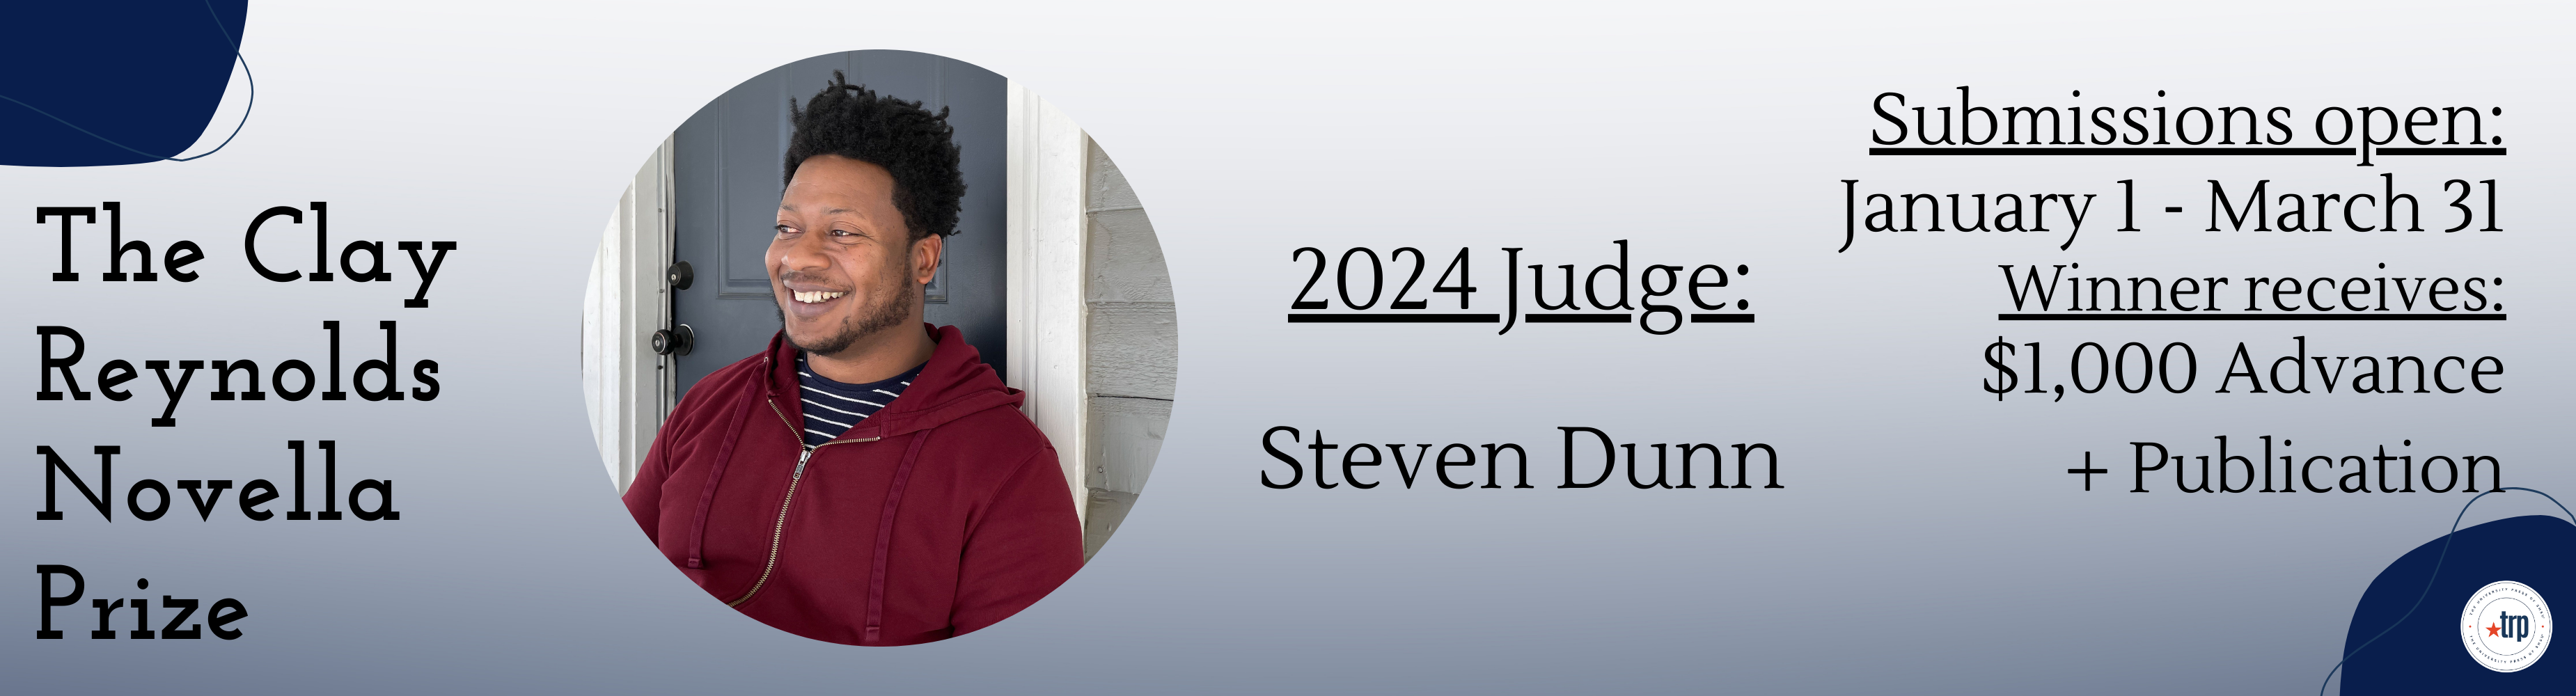 The Clay Reynolds Novella Prize. 2024 Judge Steven Dunn. Winner receives one-thousand dollar advance and publication. Submissions open January first to March thirty-first